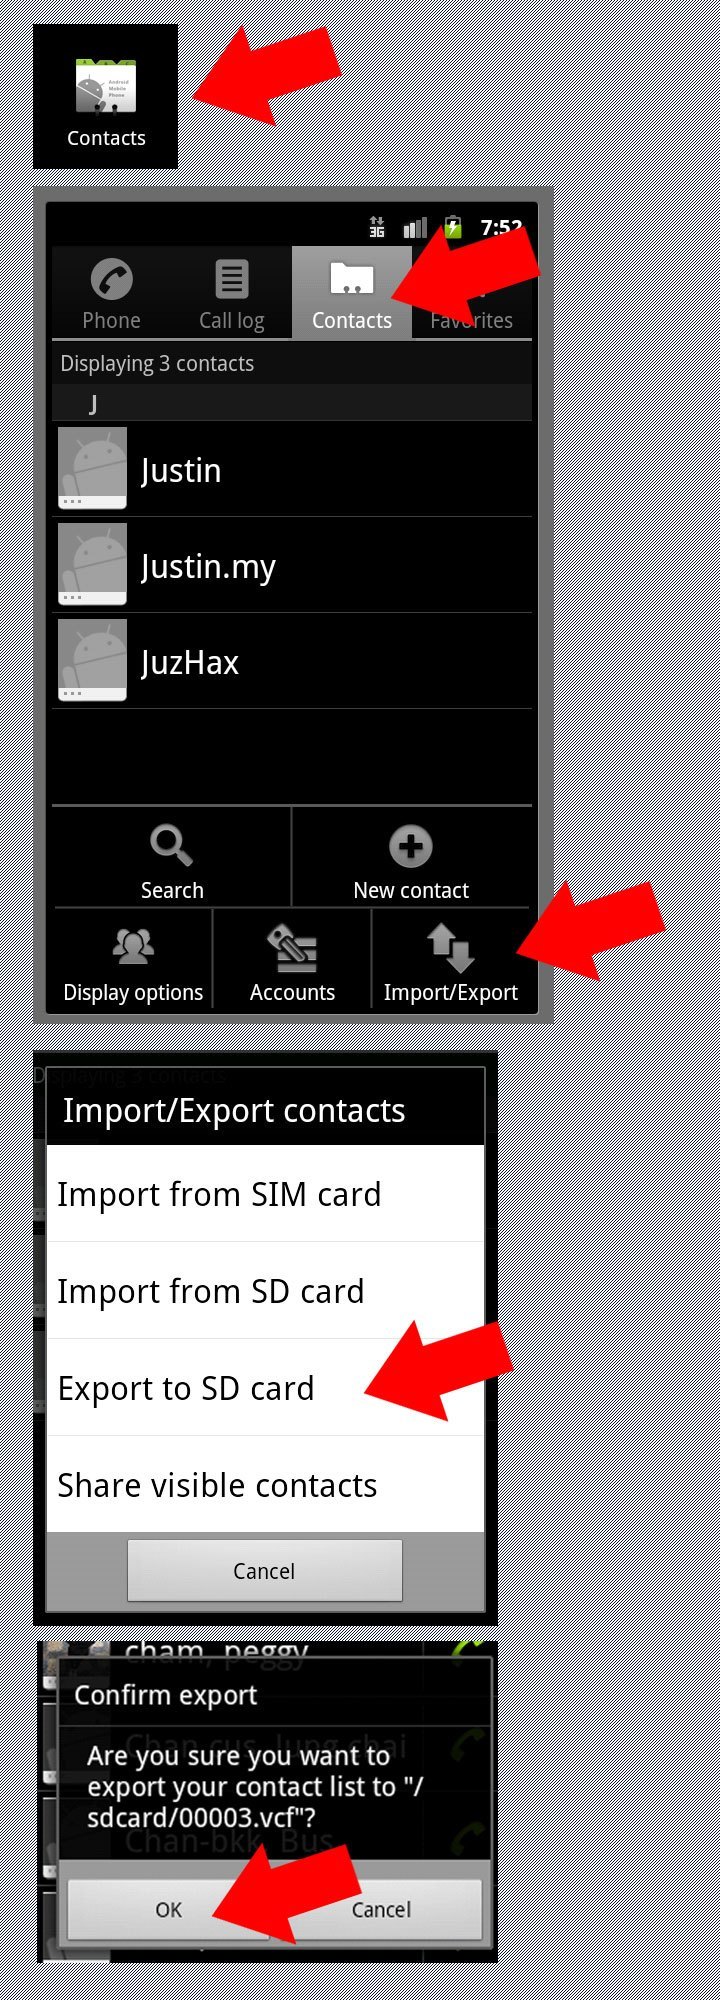 How to Transfer Contacts from Android to iPhone using icloud